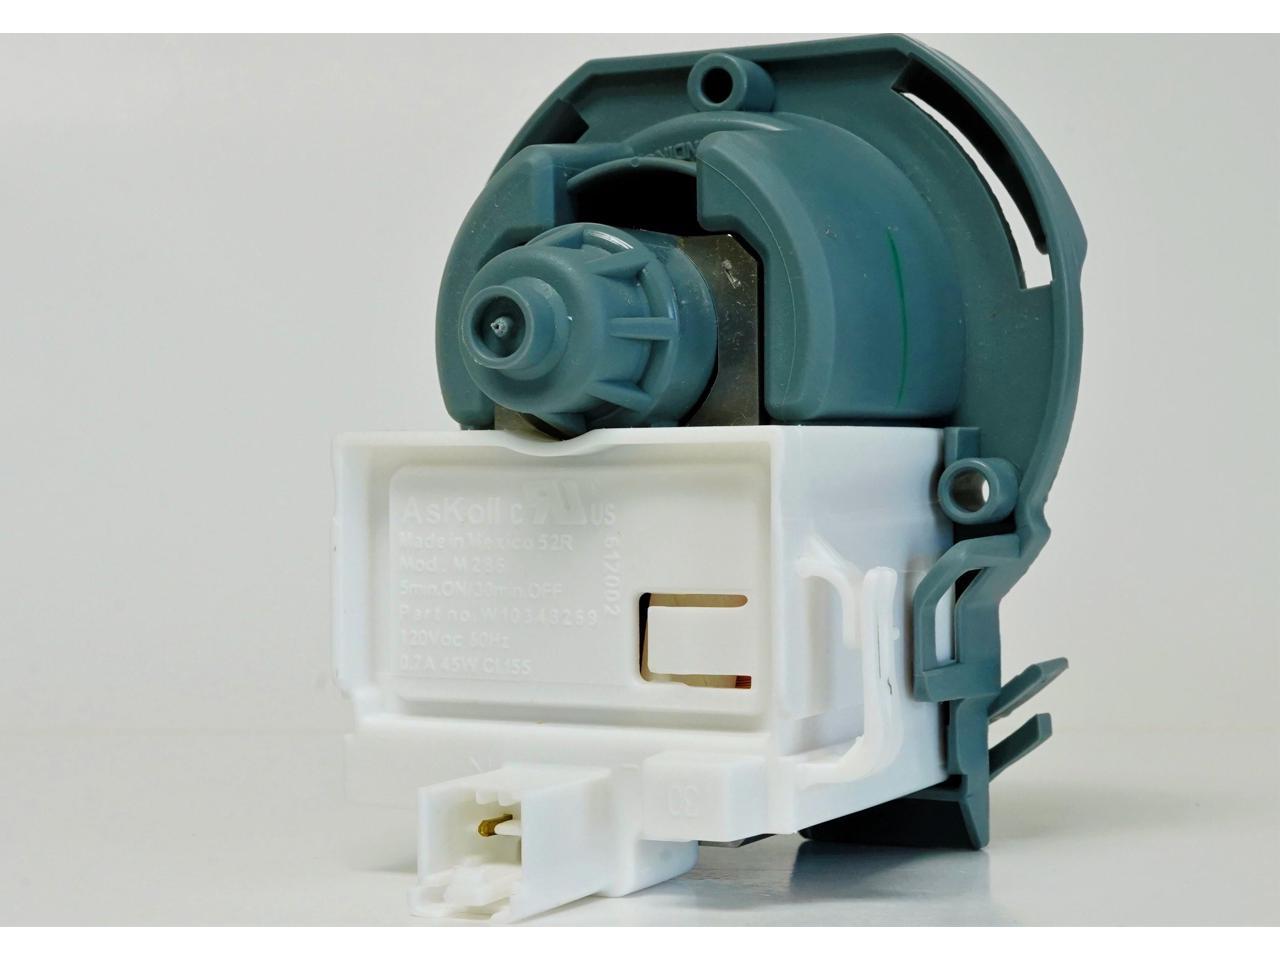 REPLACEMENT FOR WHIRLPOOL W10348269 8558995 DISHWASHER PUMP 